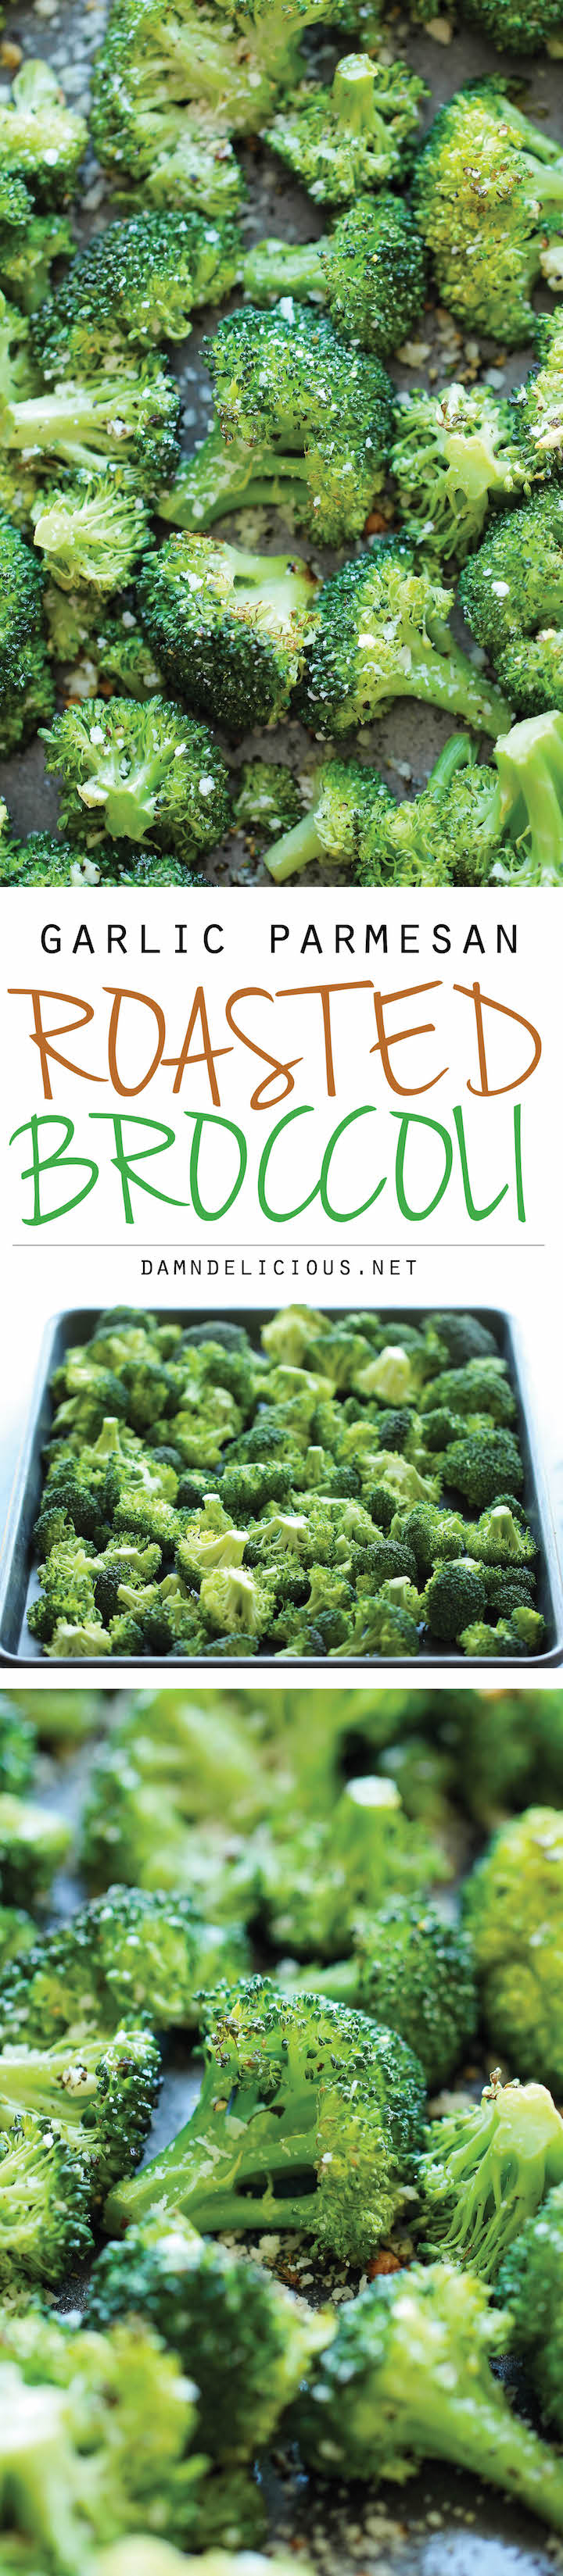 Garlic Parmesan Roasted Broccoli - This comes together so quickly with just 5 min prep. Plus, it's the perfect and easiest side dish to any meal!